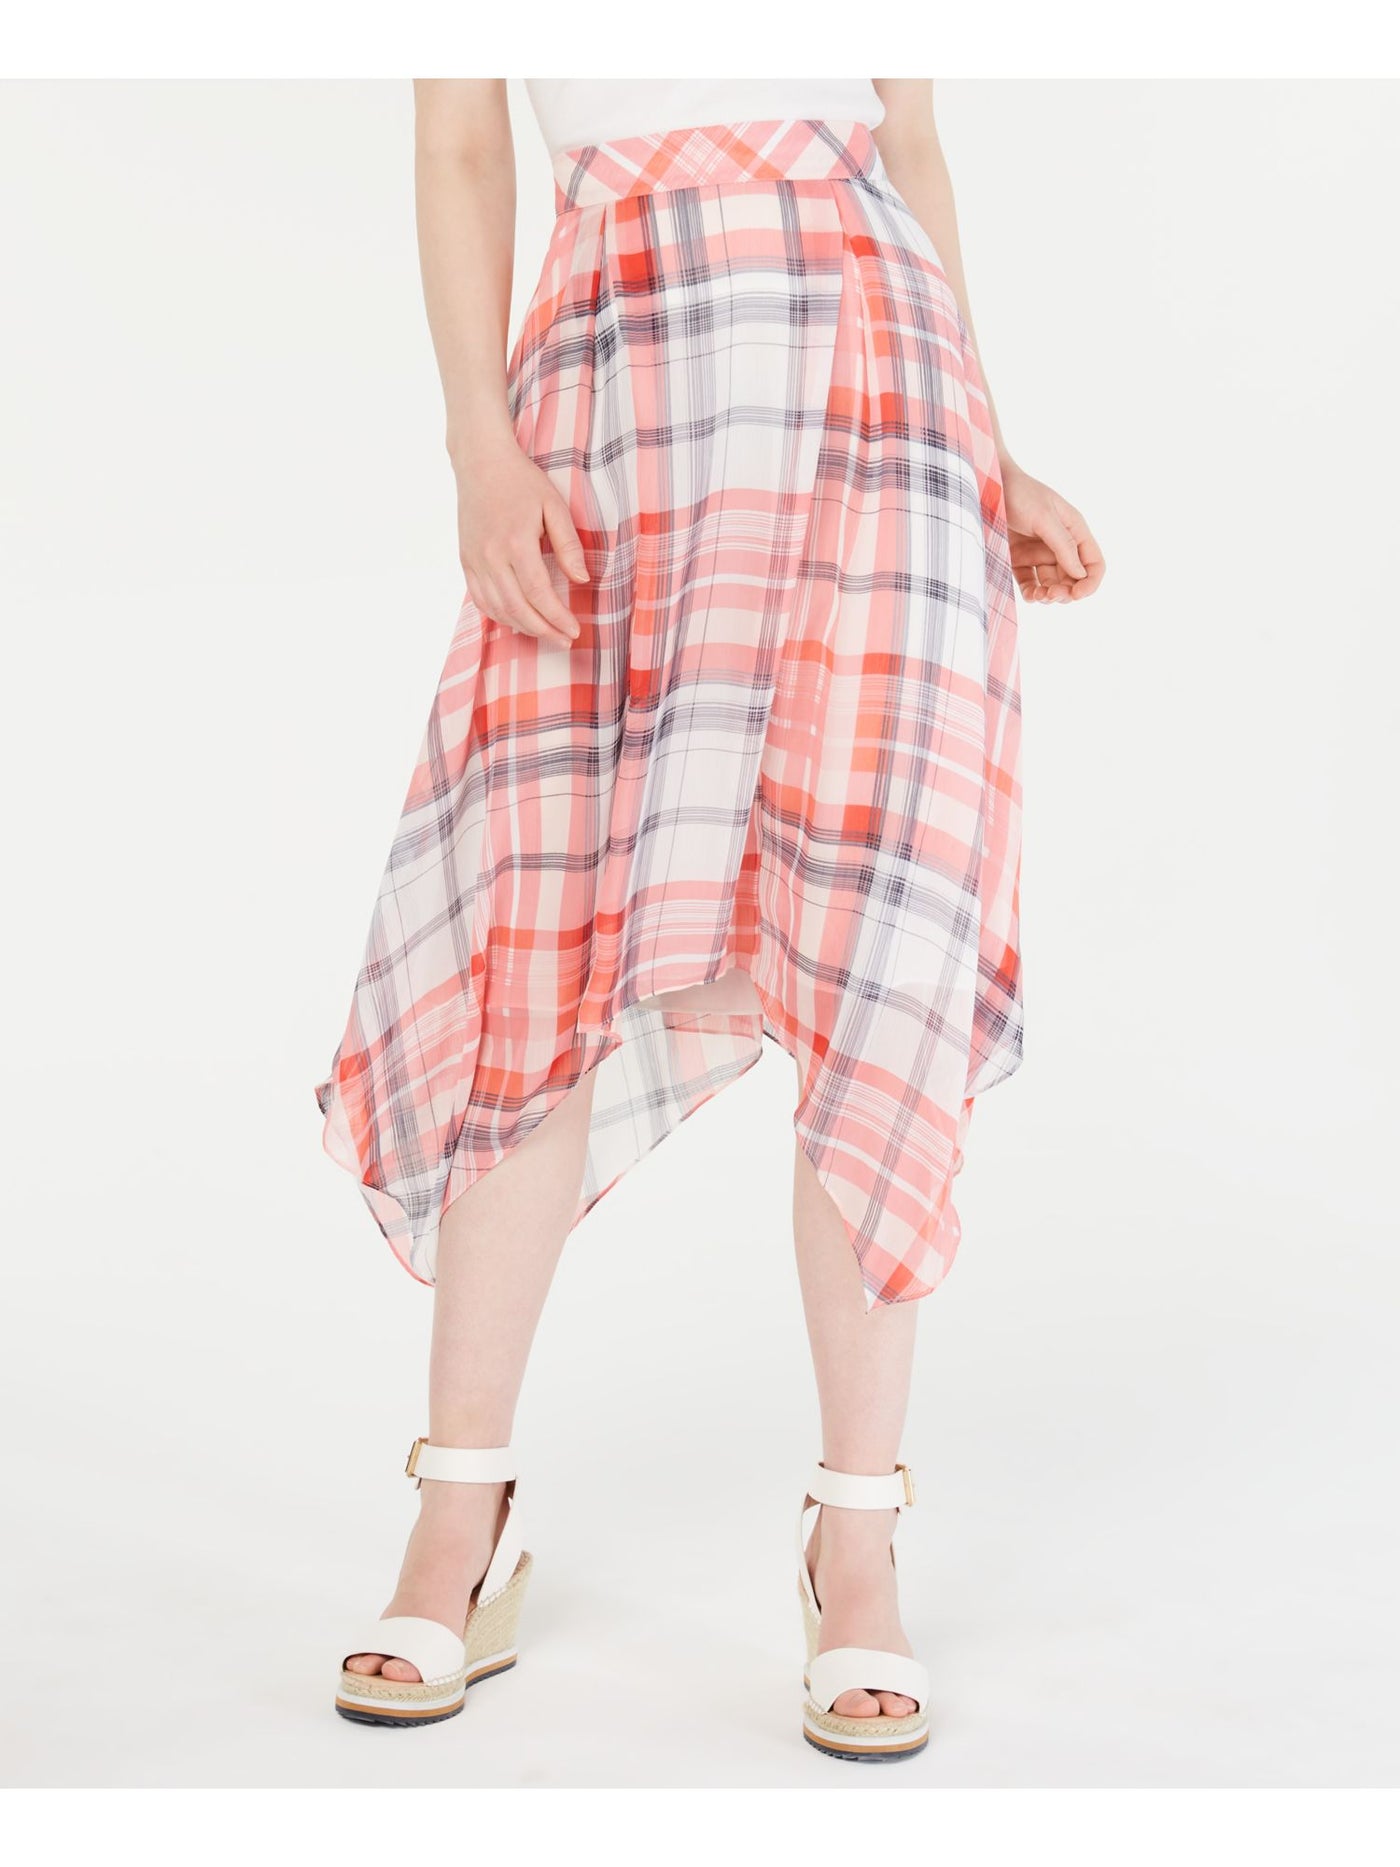 TOMMY HILFIGER Womens Pink Plaid Below The Knee Circle Skirt Size: 18